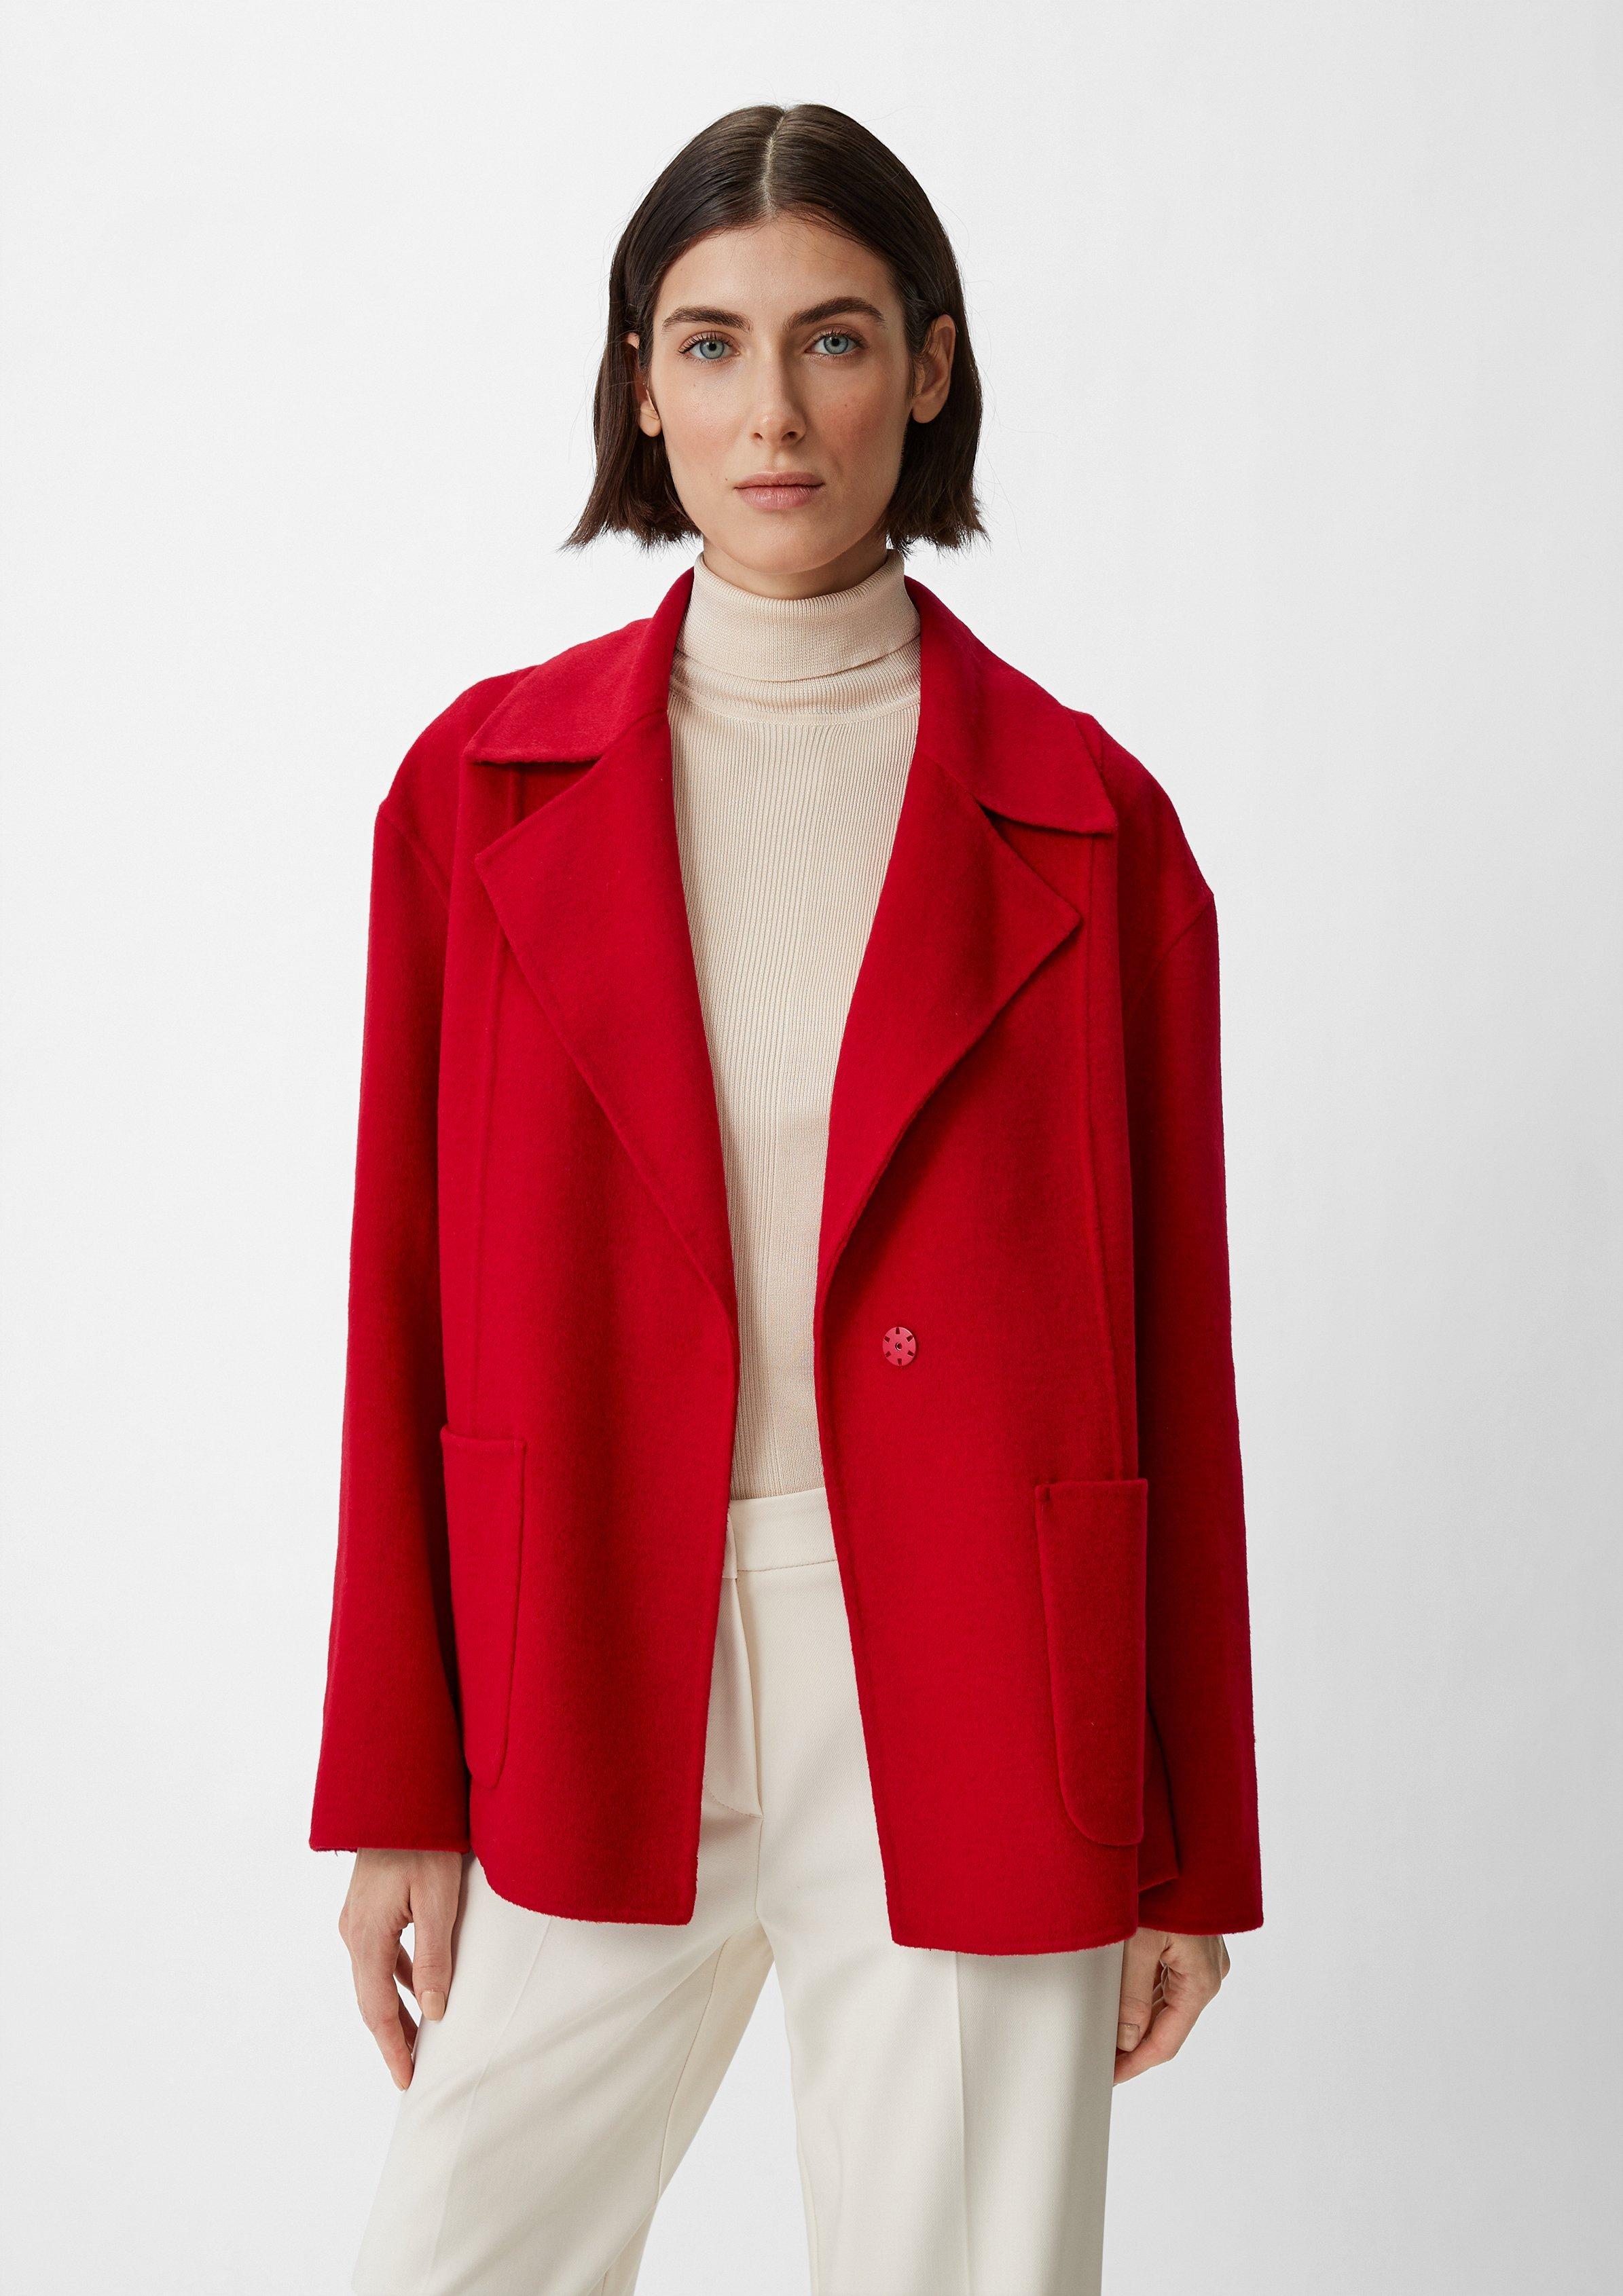 Double-faced jacket made of blended wool - poppy red | Comma